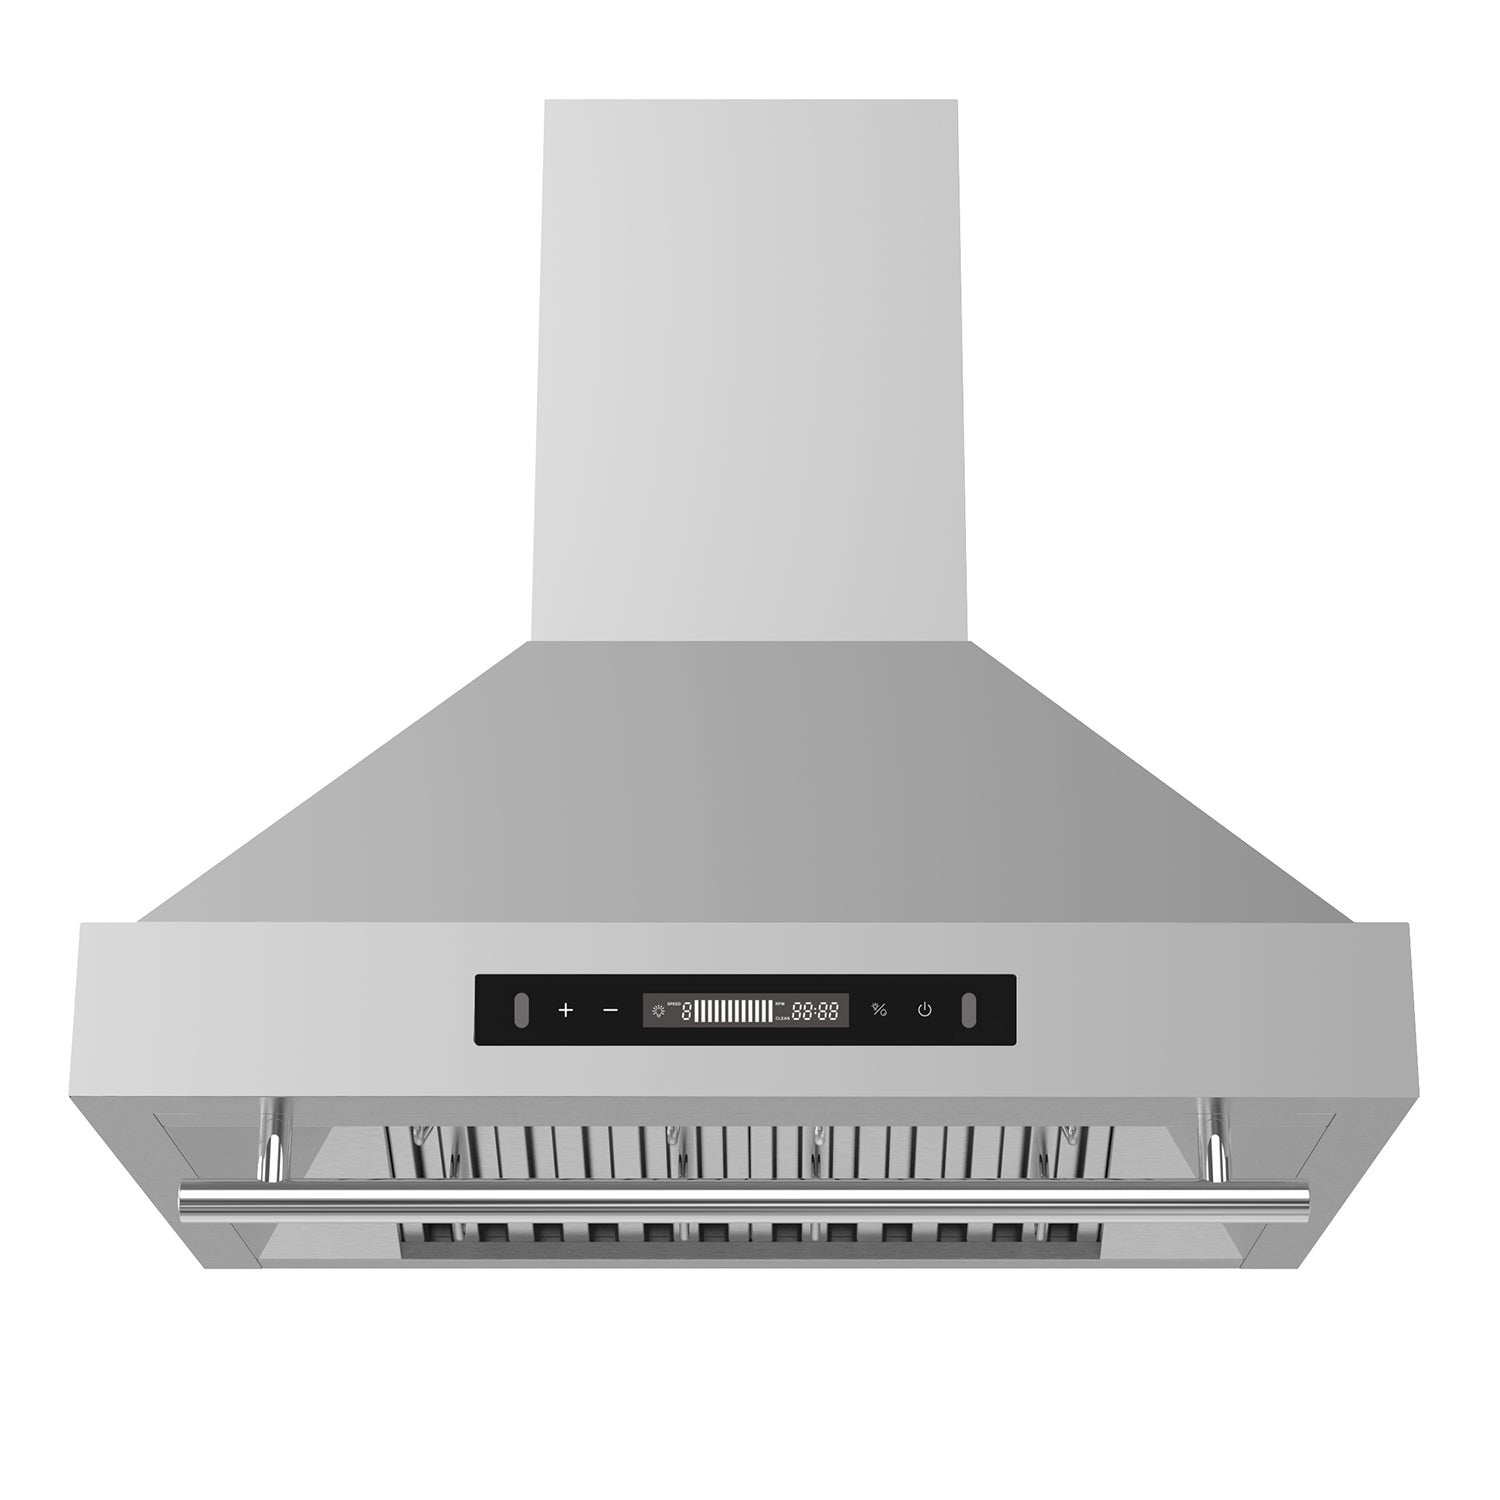 IKTCH 30 inch Wall Mount Range Hood 900 CFM Ducted/Ductless Convertible, Kitchen Chimney Vent Stainless Steel with Gesture Sensing & Touch Control